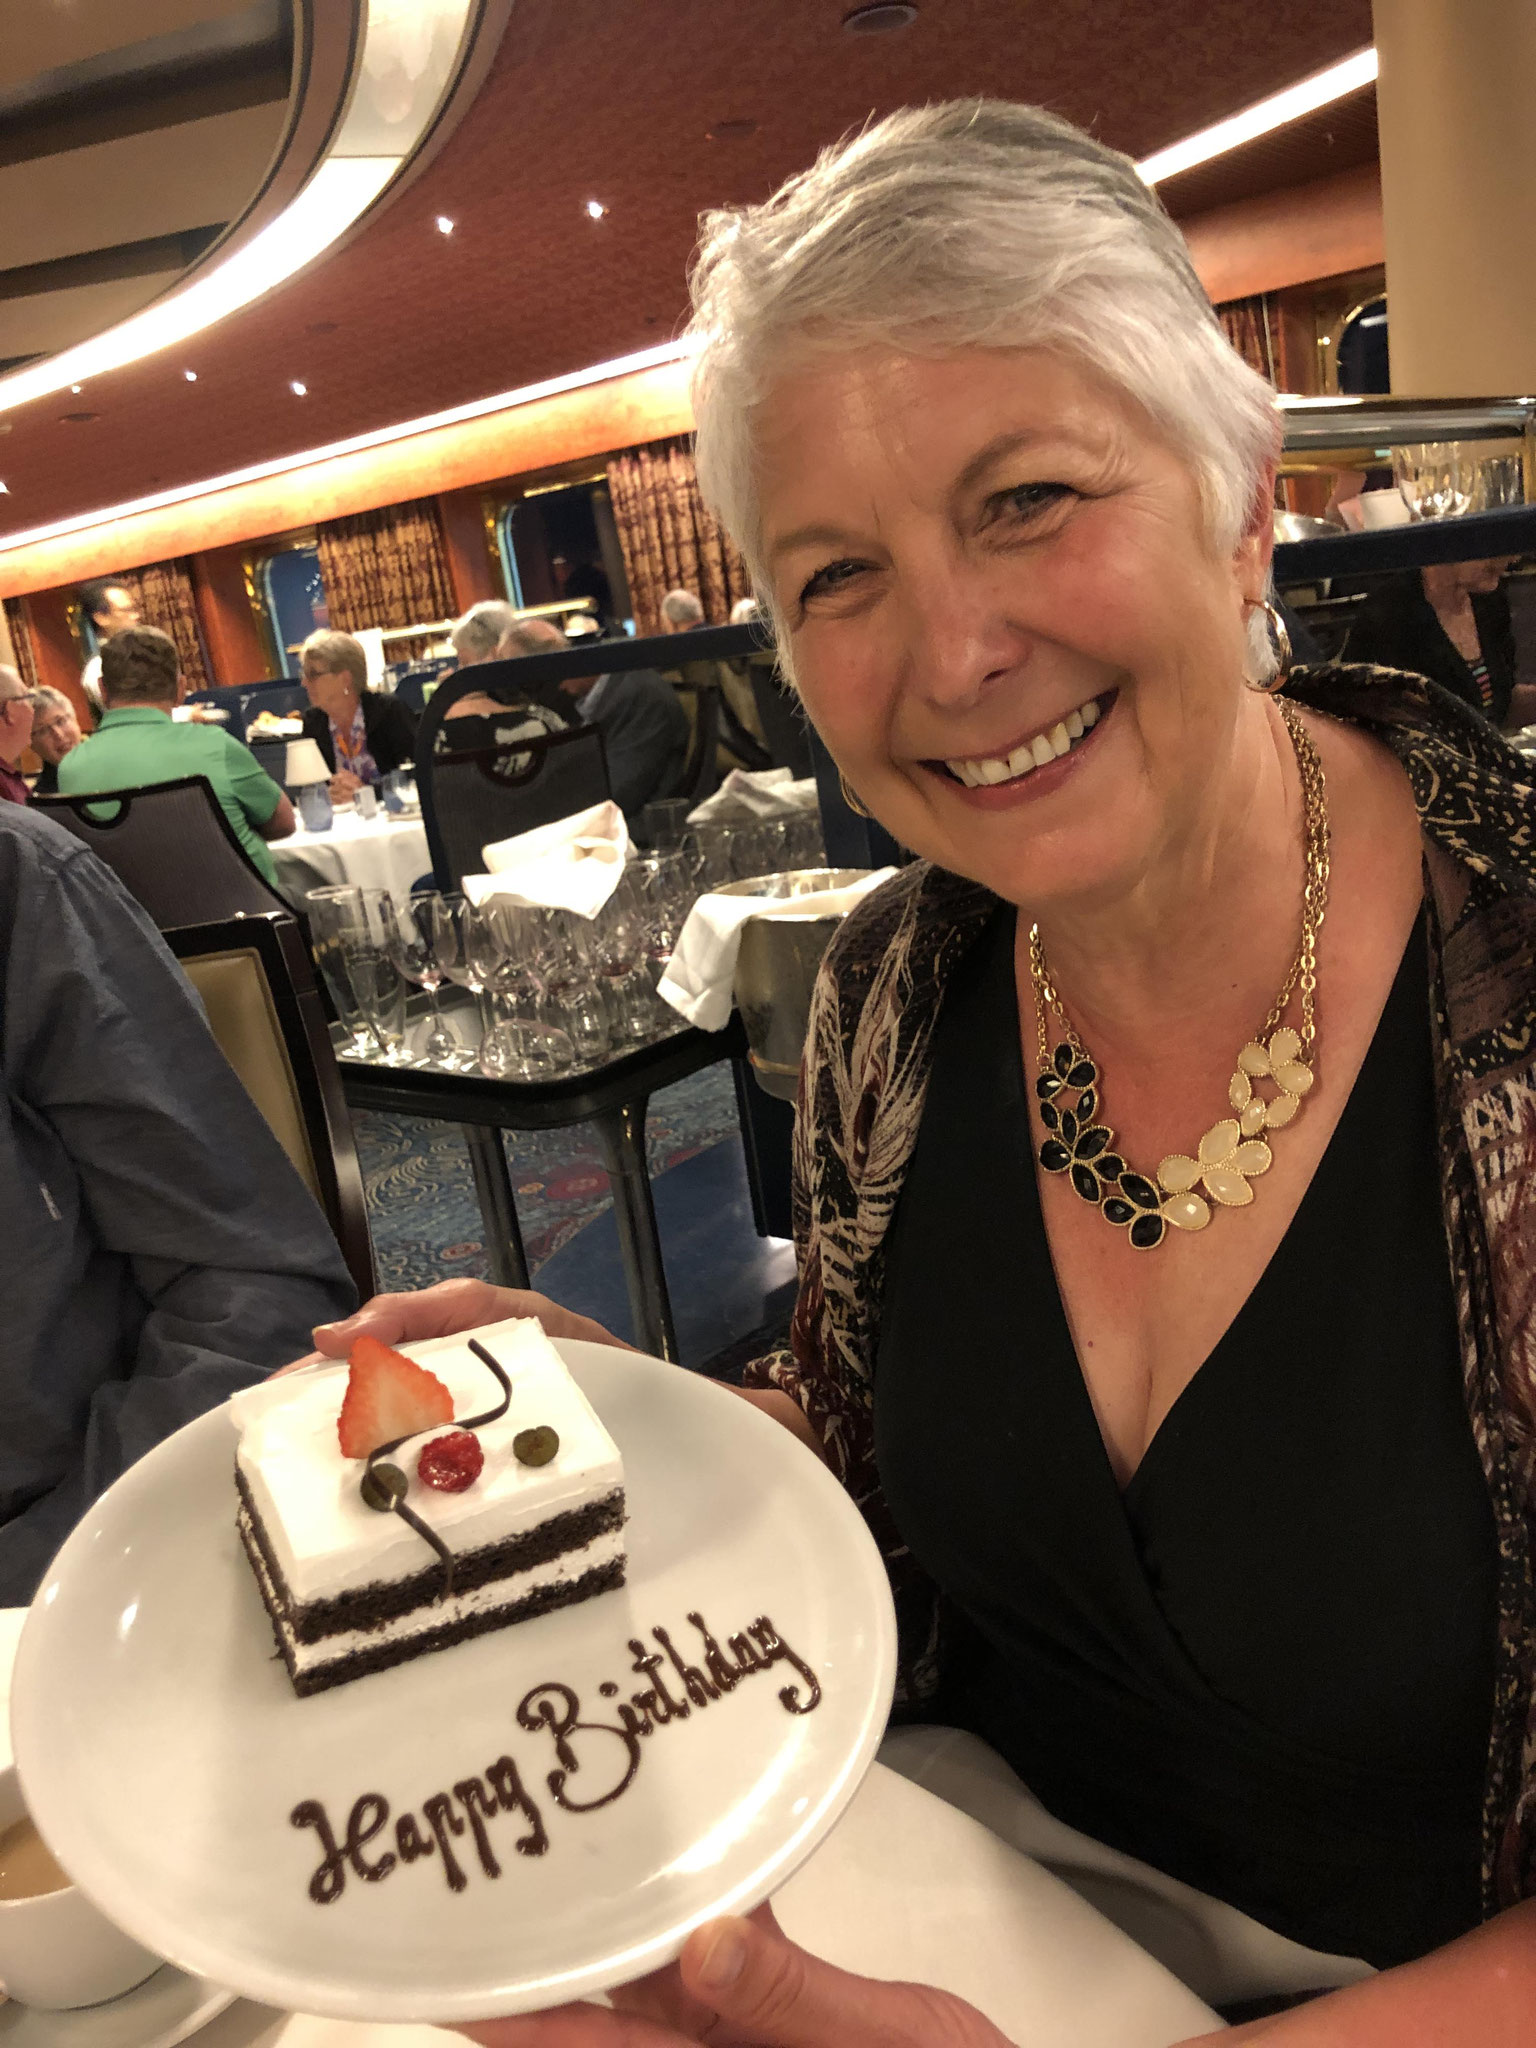 Another birthday on the ship. Yes, that makes 3!!